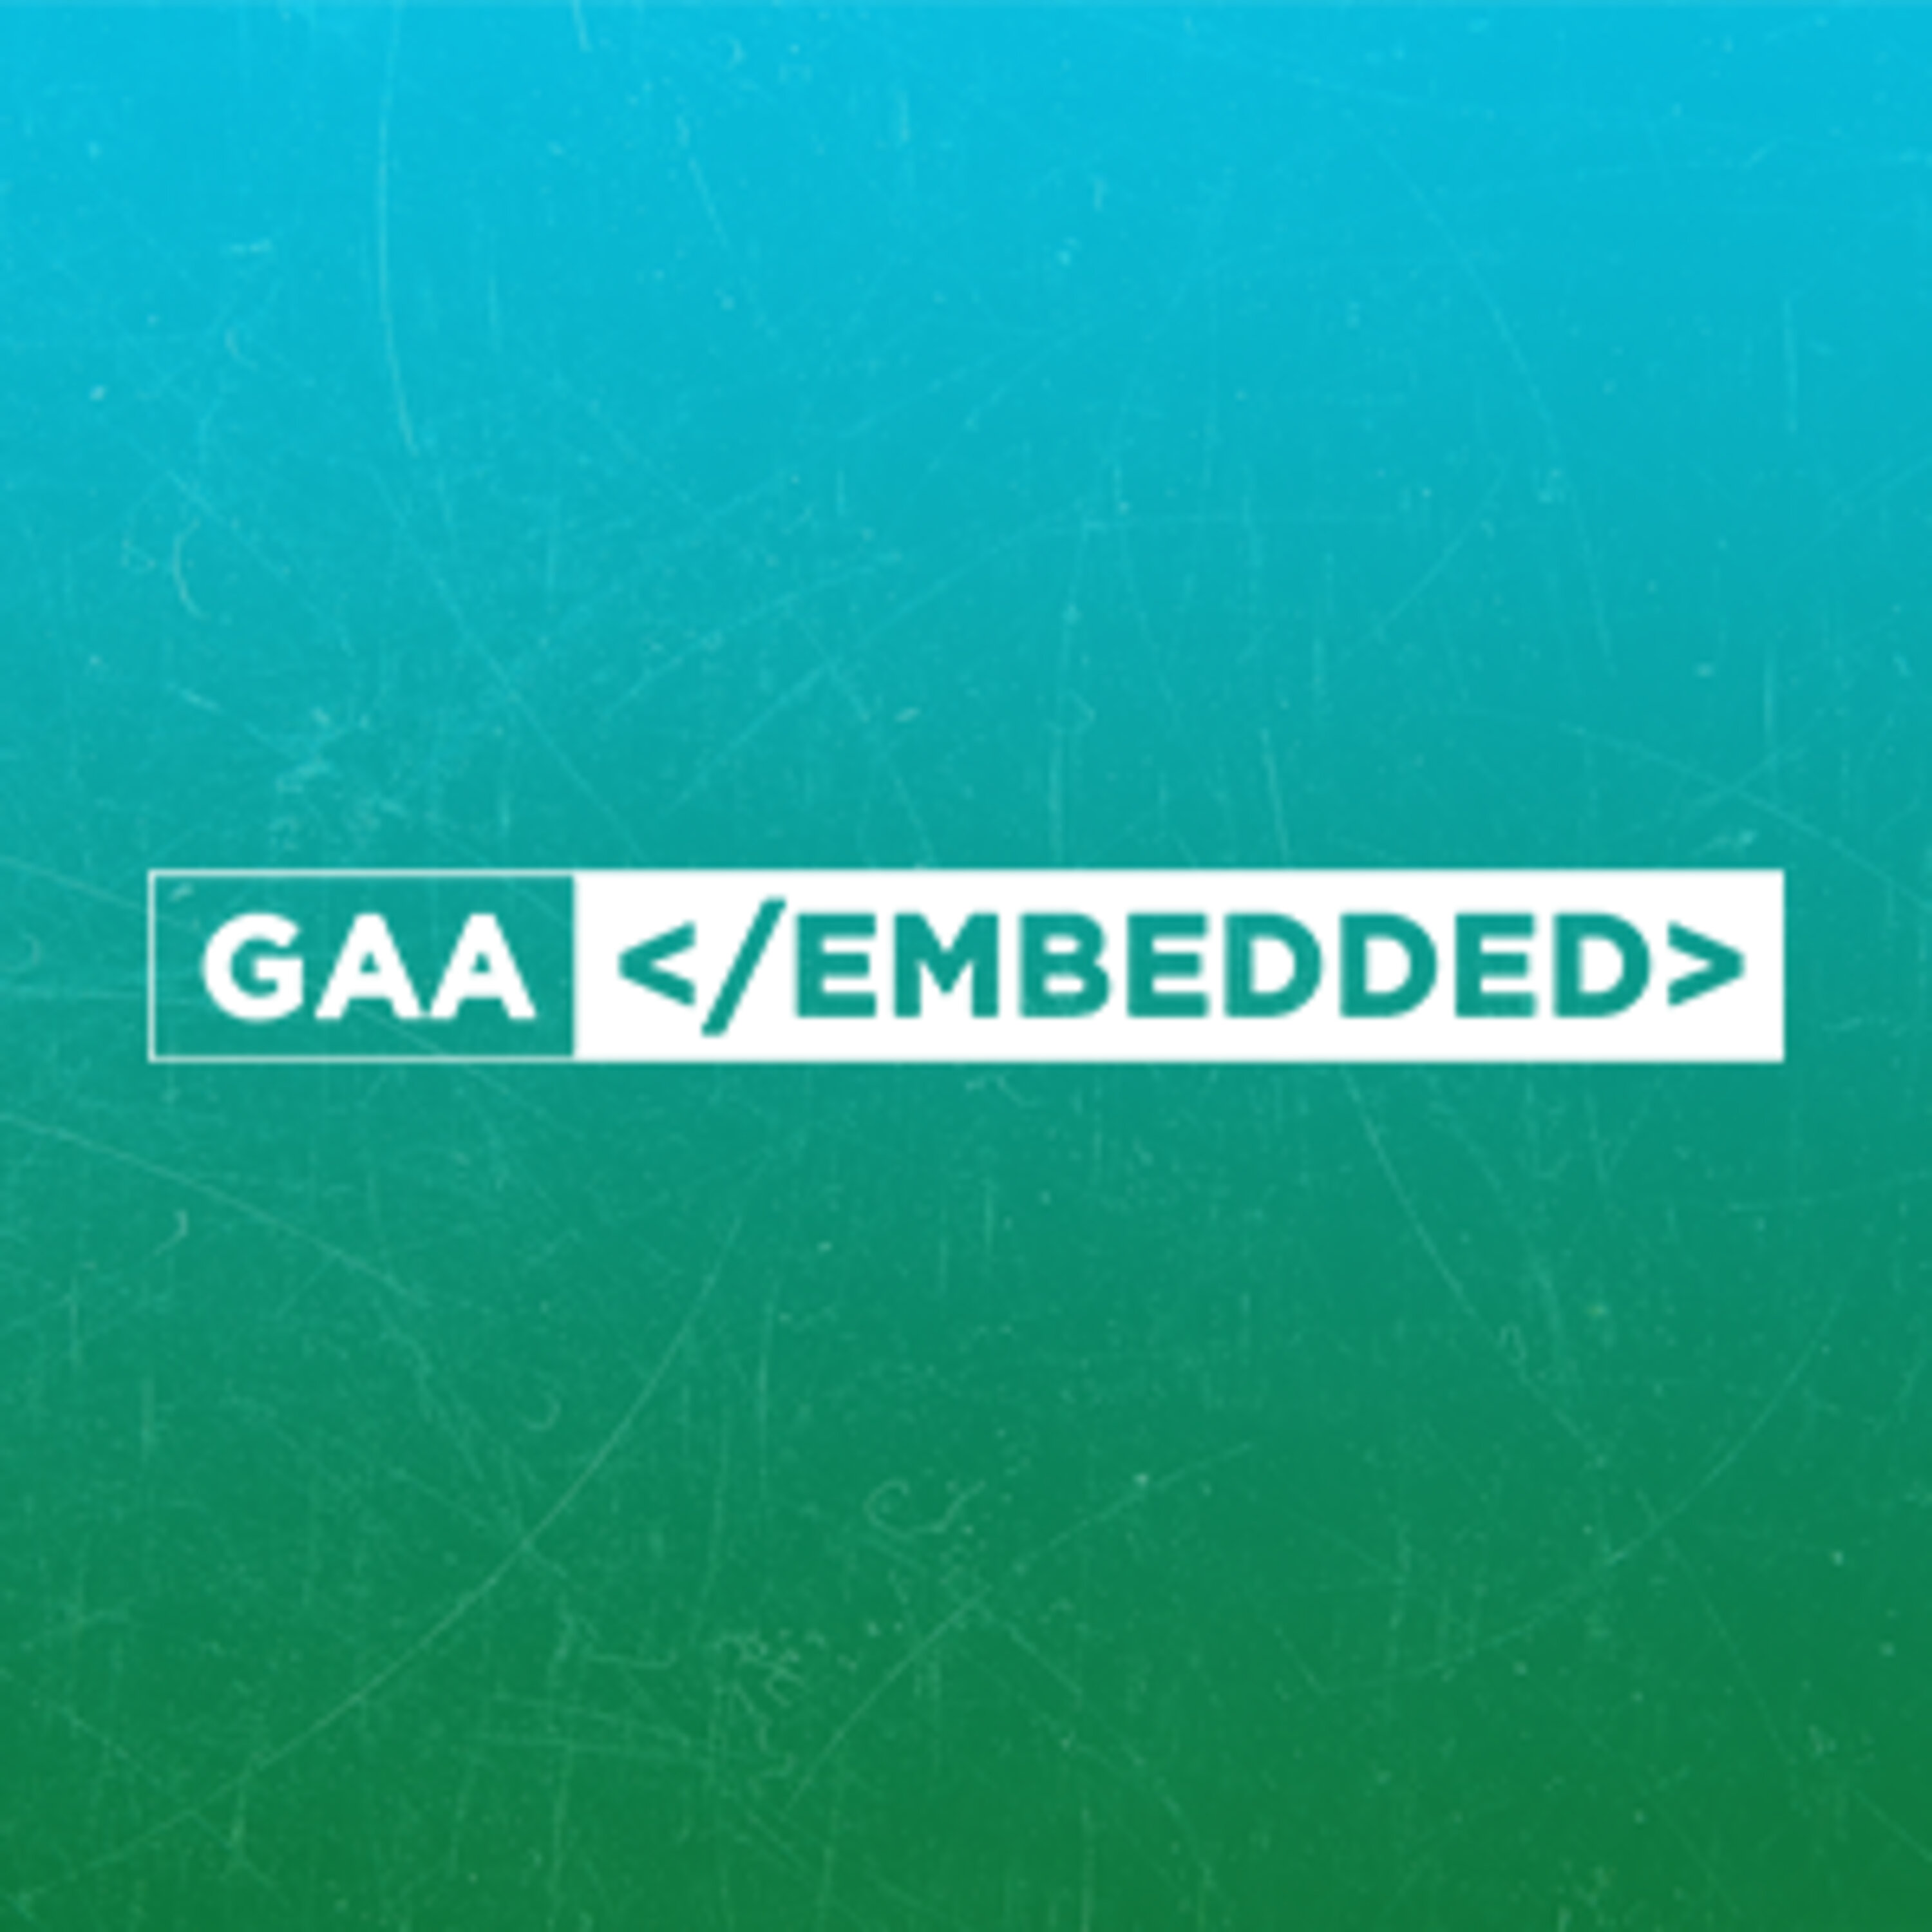 GAA Embedded - A Dynasty Crumbles To  The Most Fitting Opposition, with Darran O'Sullivan